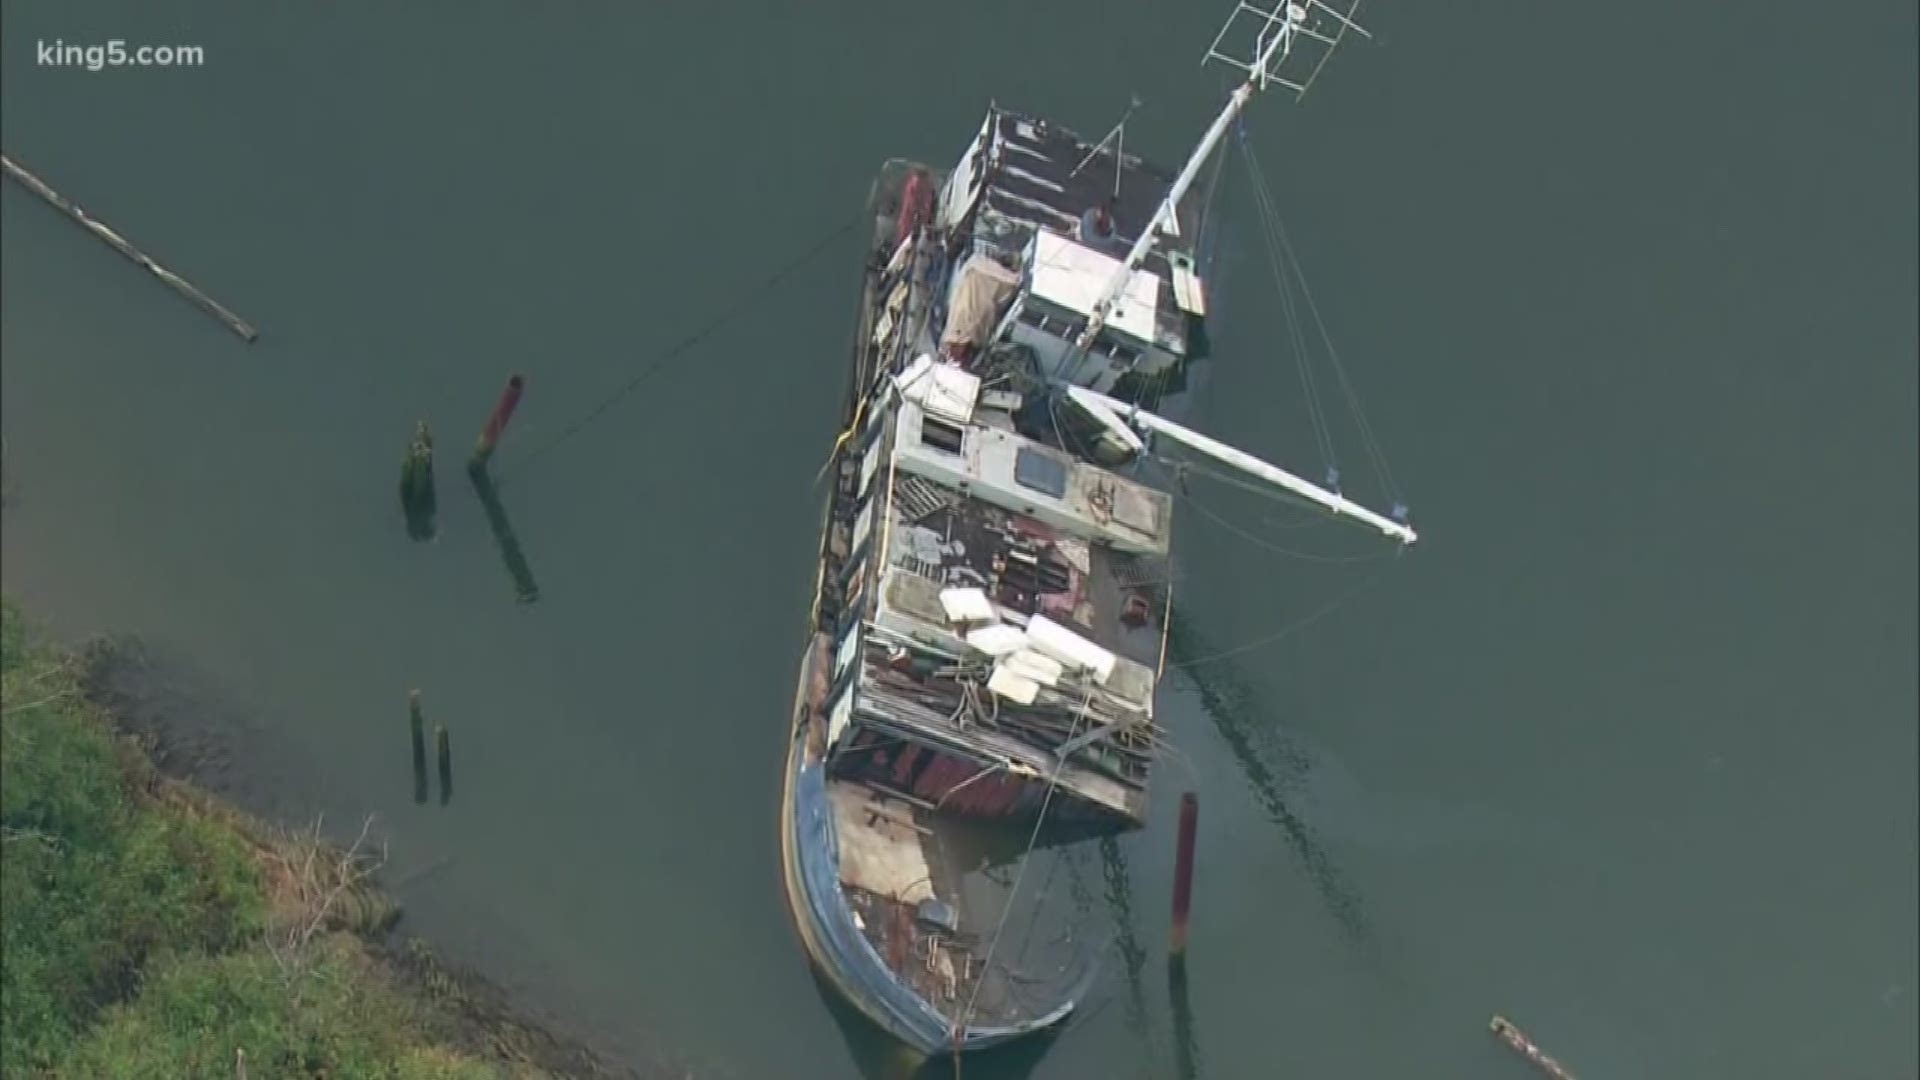 The Dept. of Natural Resources has identified at least 204 derelict vessels statewide. Those are sunken boats that can cause pollution and safety issues.